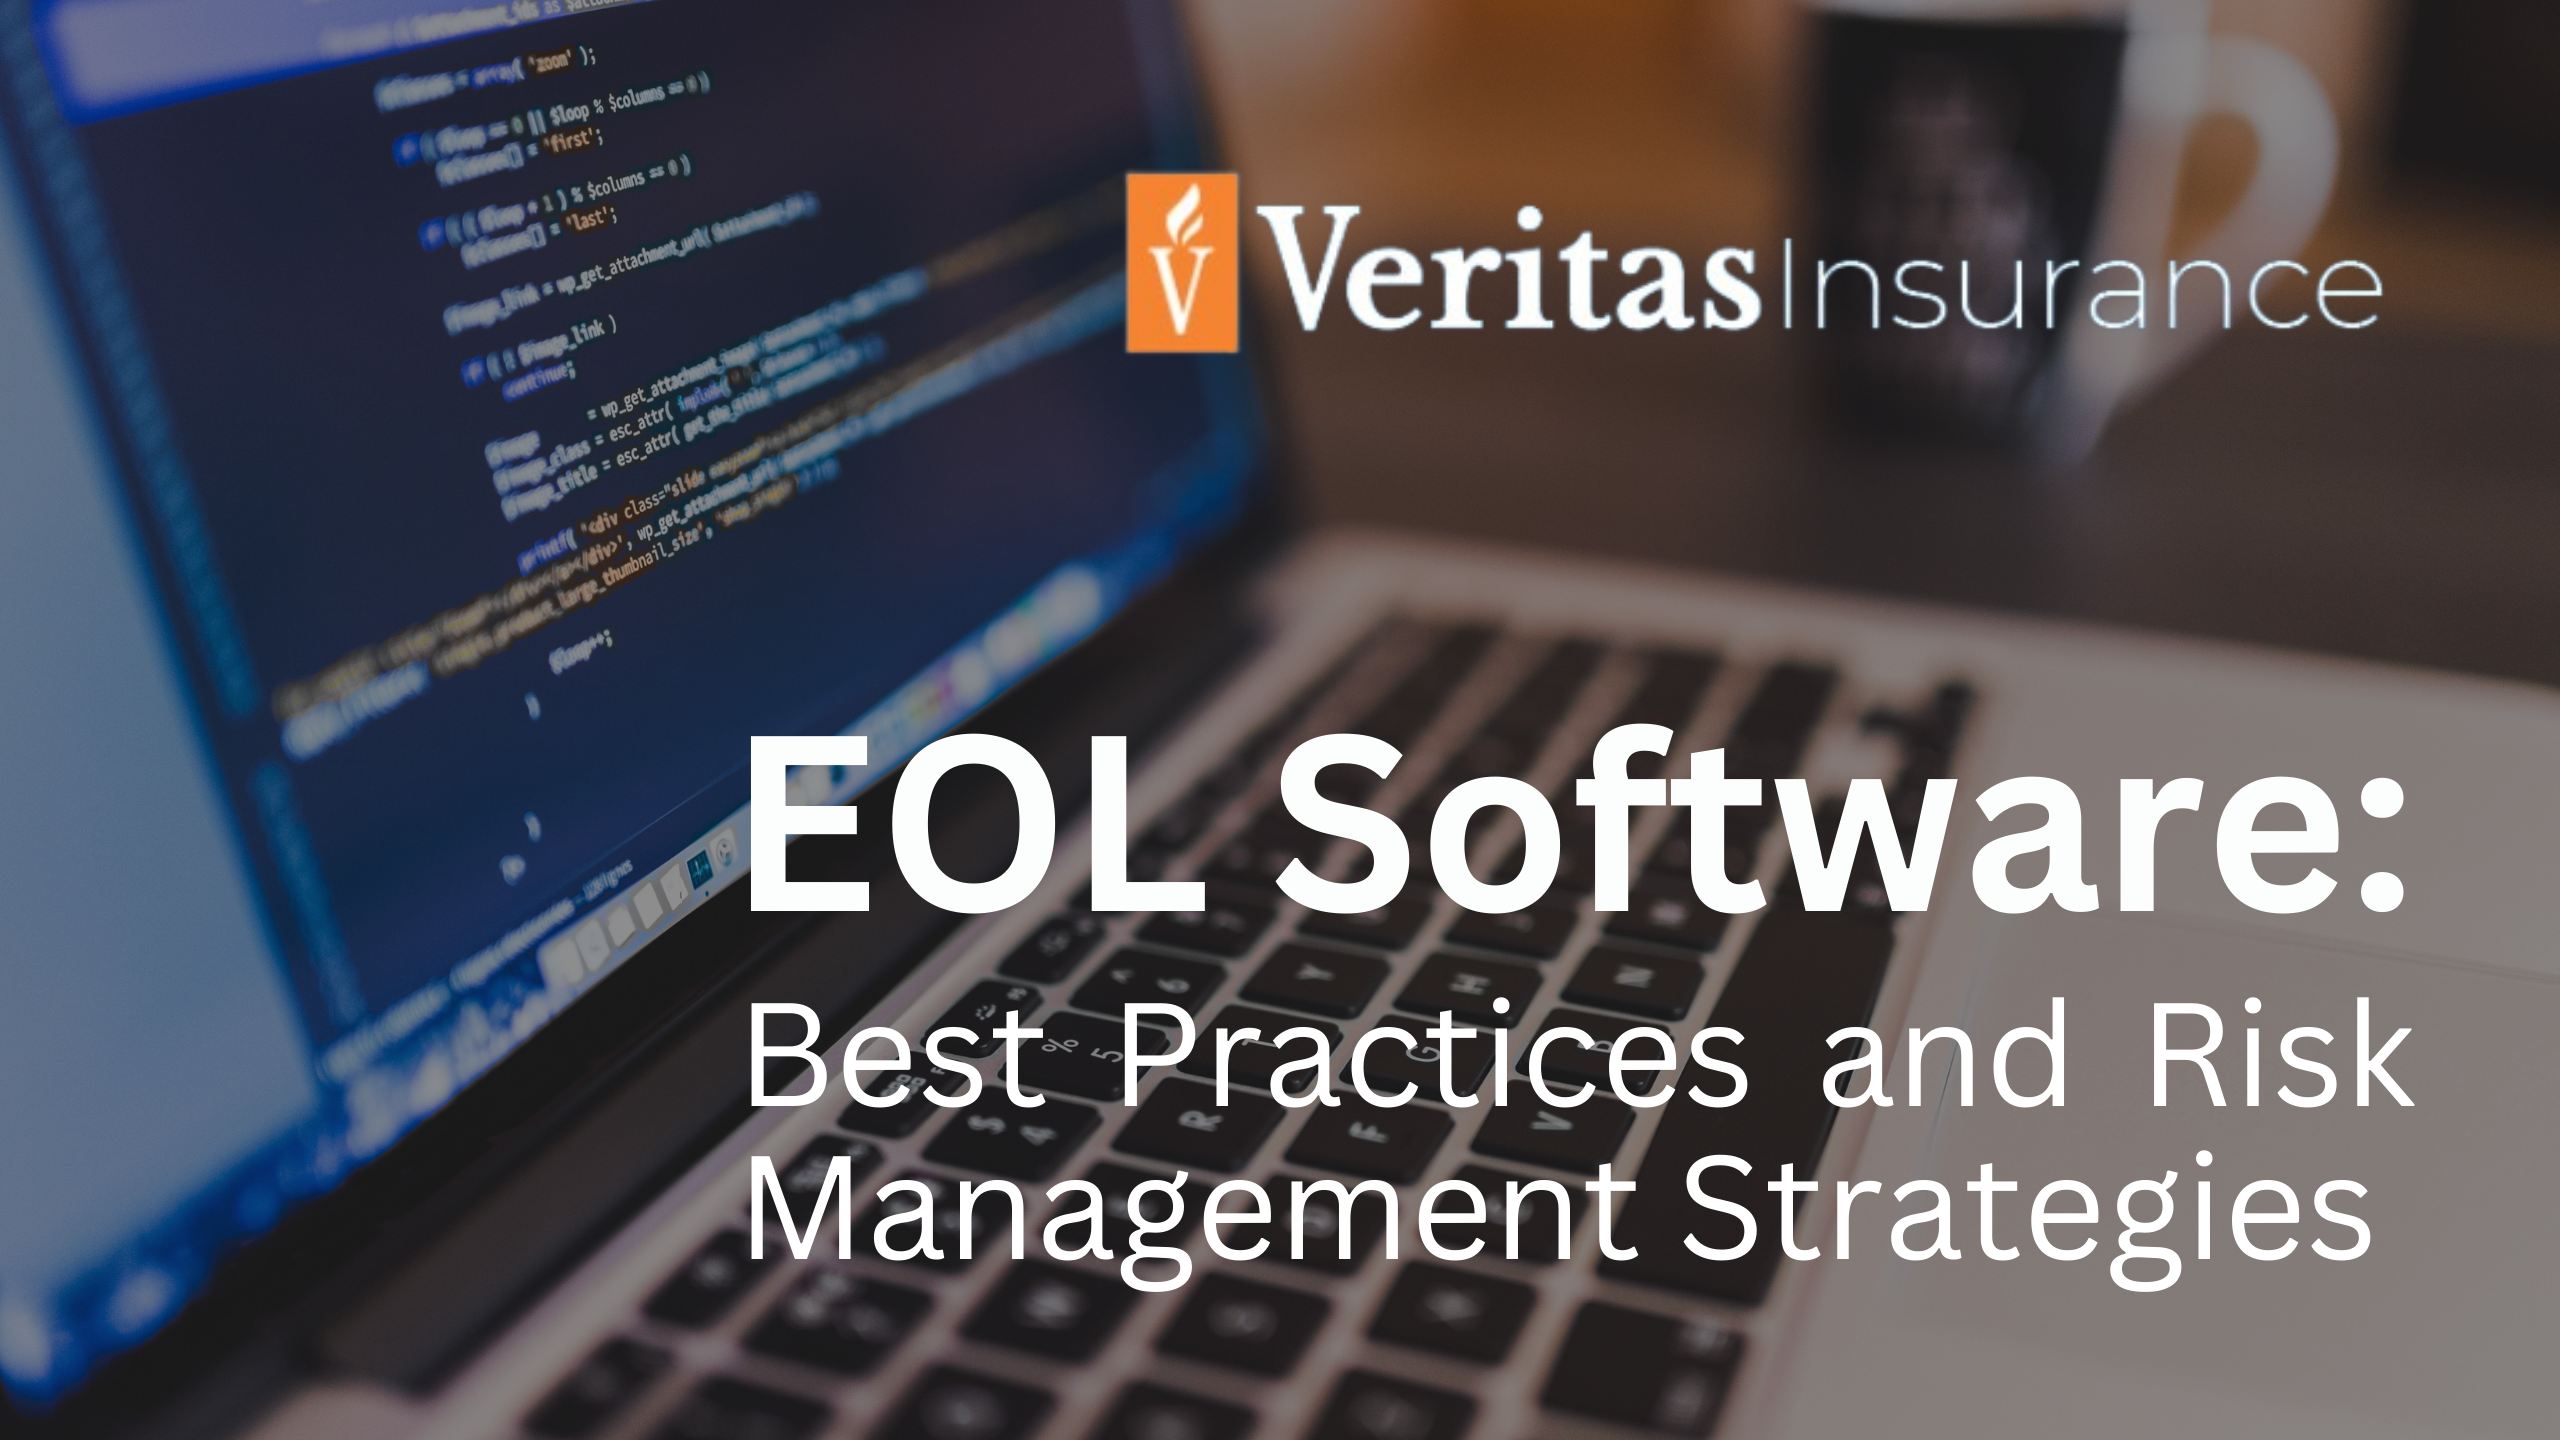 Old software cybersecurity - eol software best practices and risk management strategies